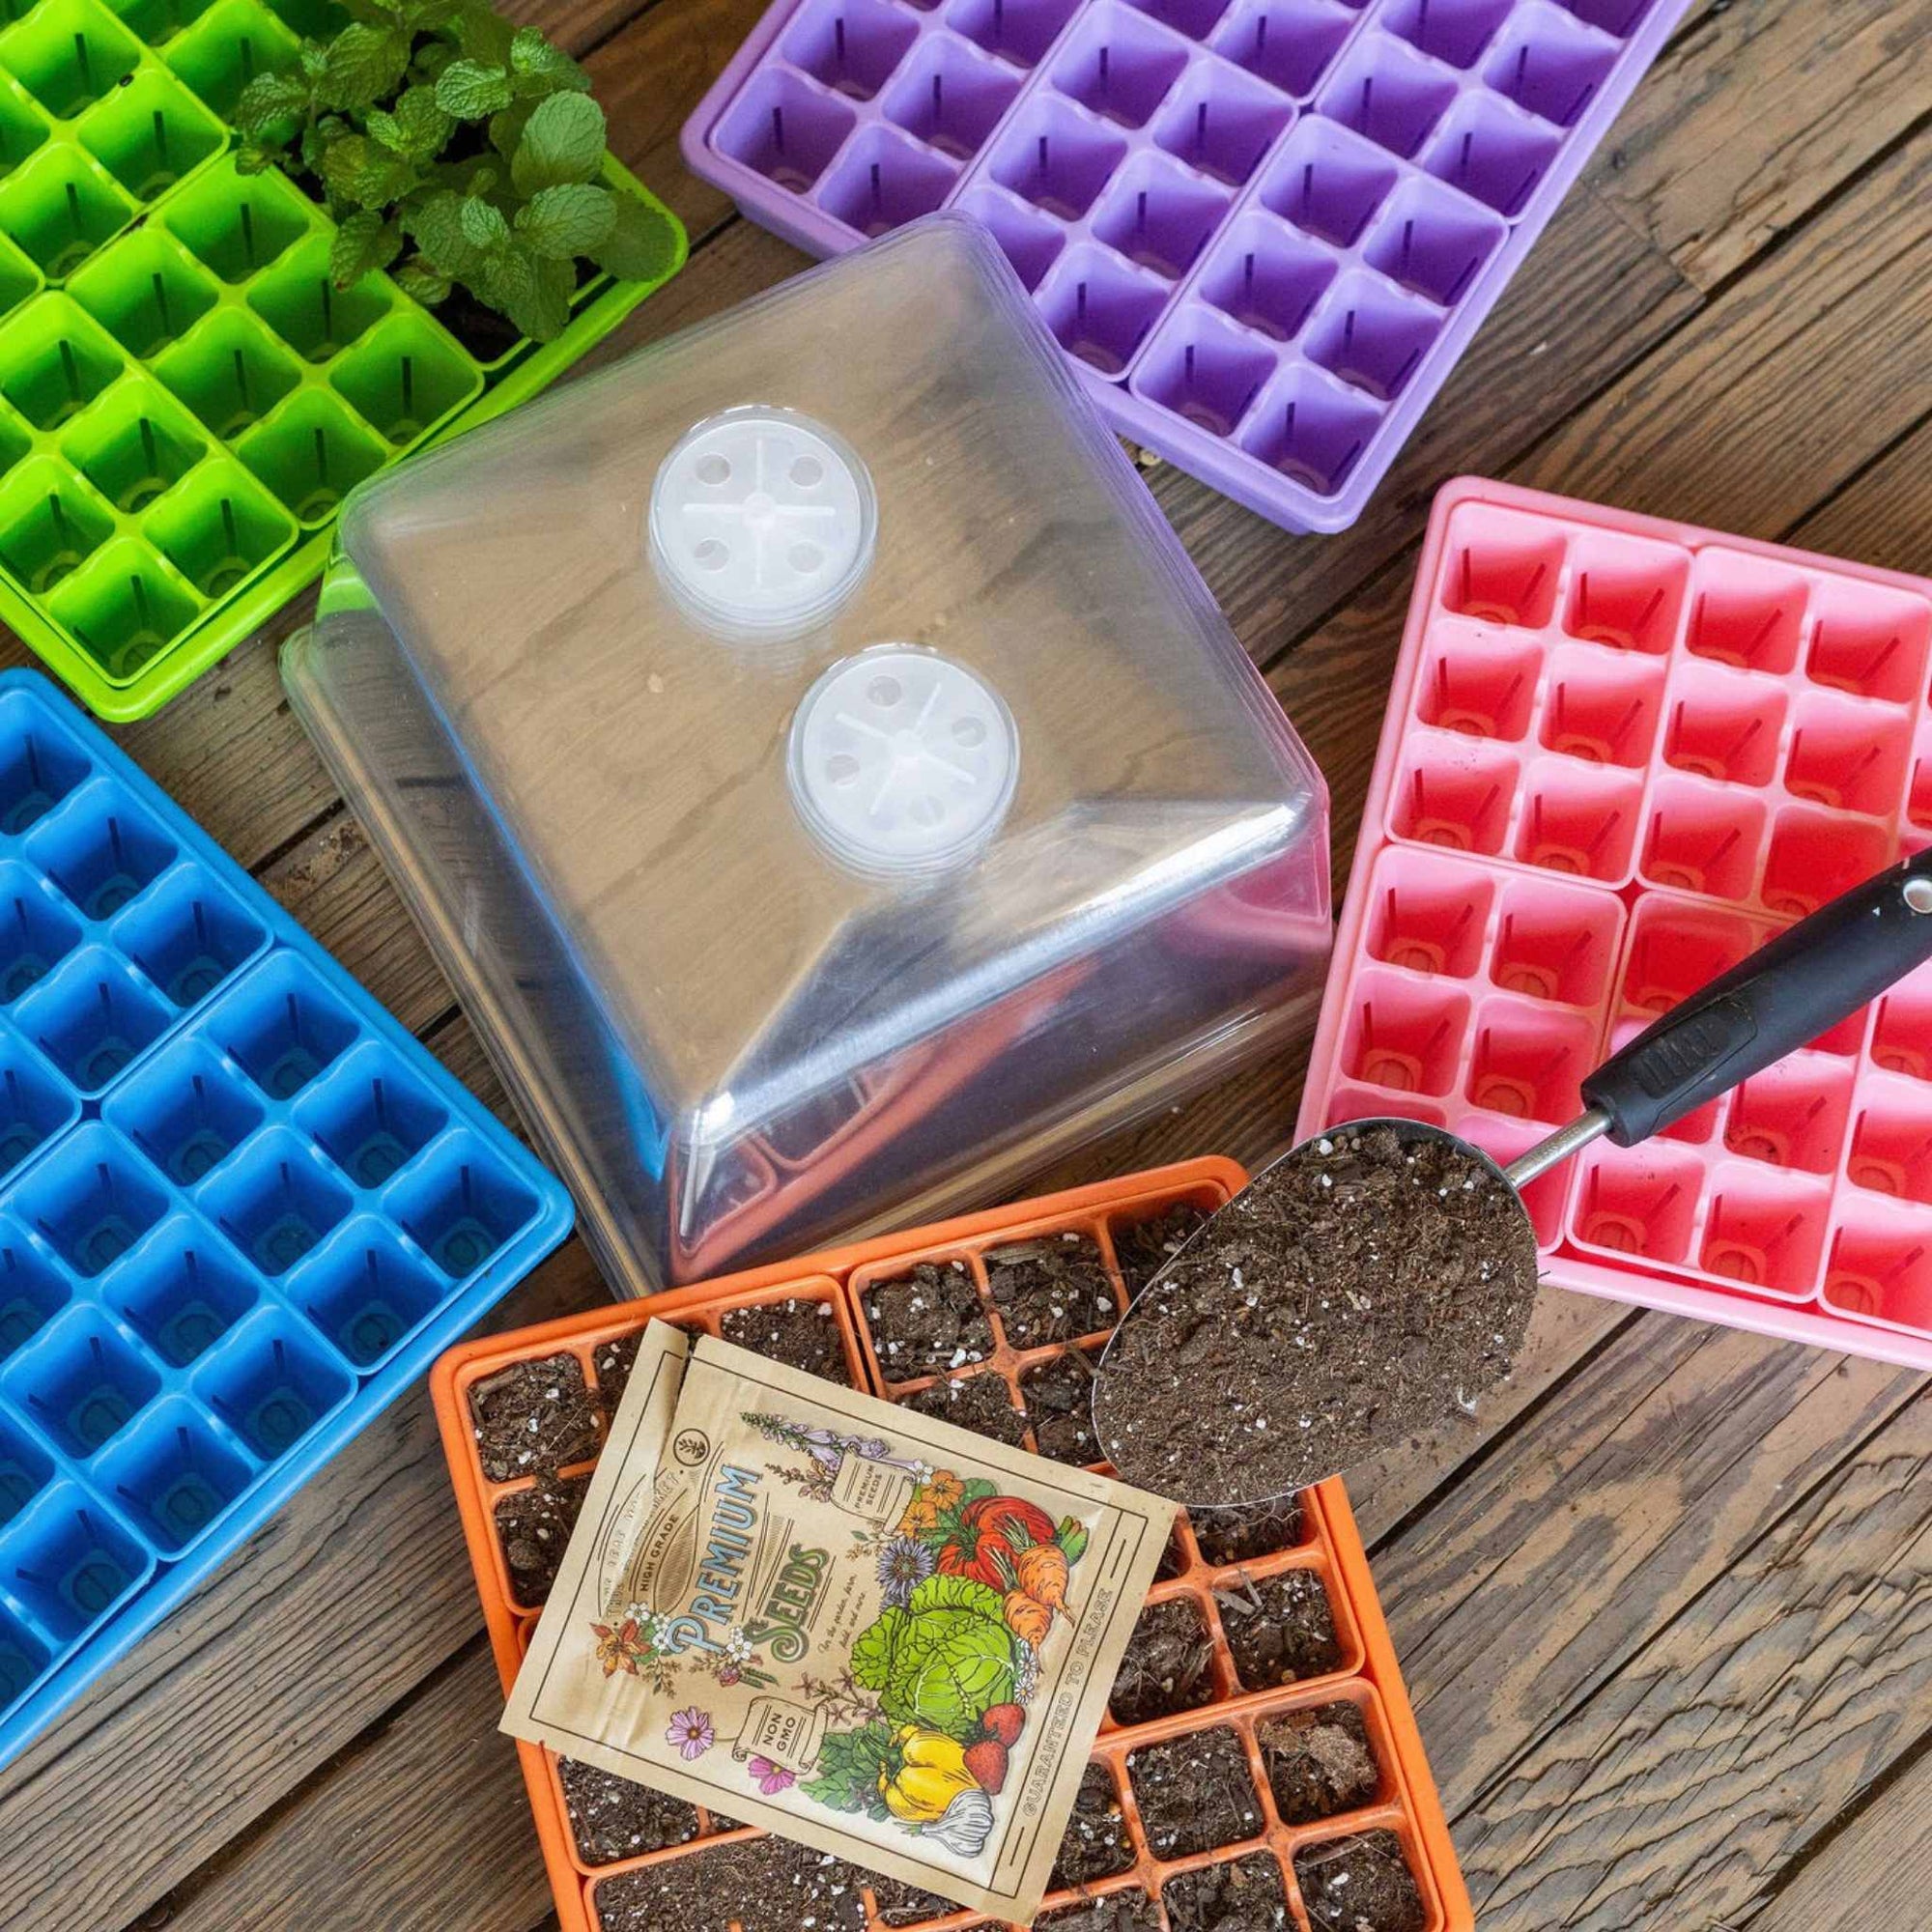 1010 Seed Starting Kits in Purple, Blue, Green, Pink, and Orange